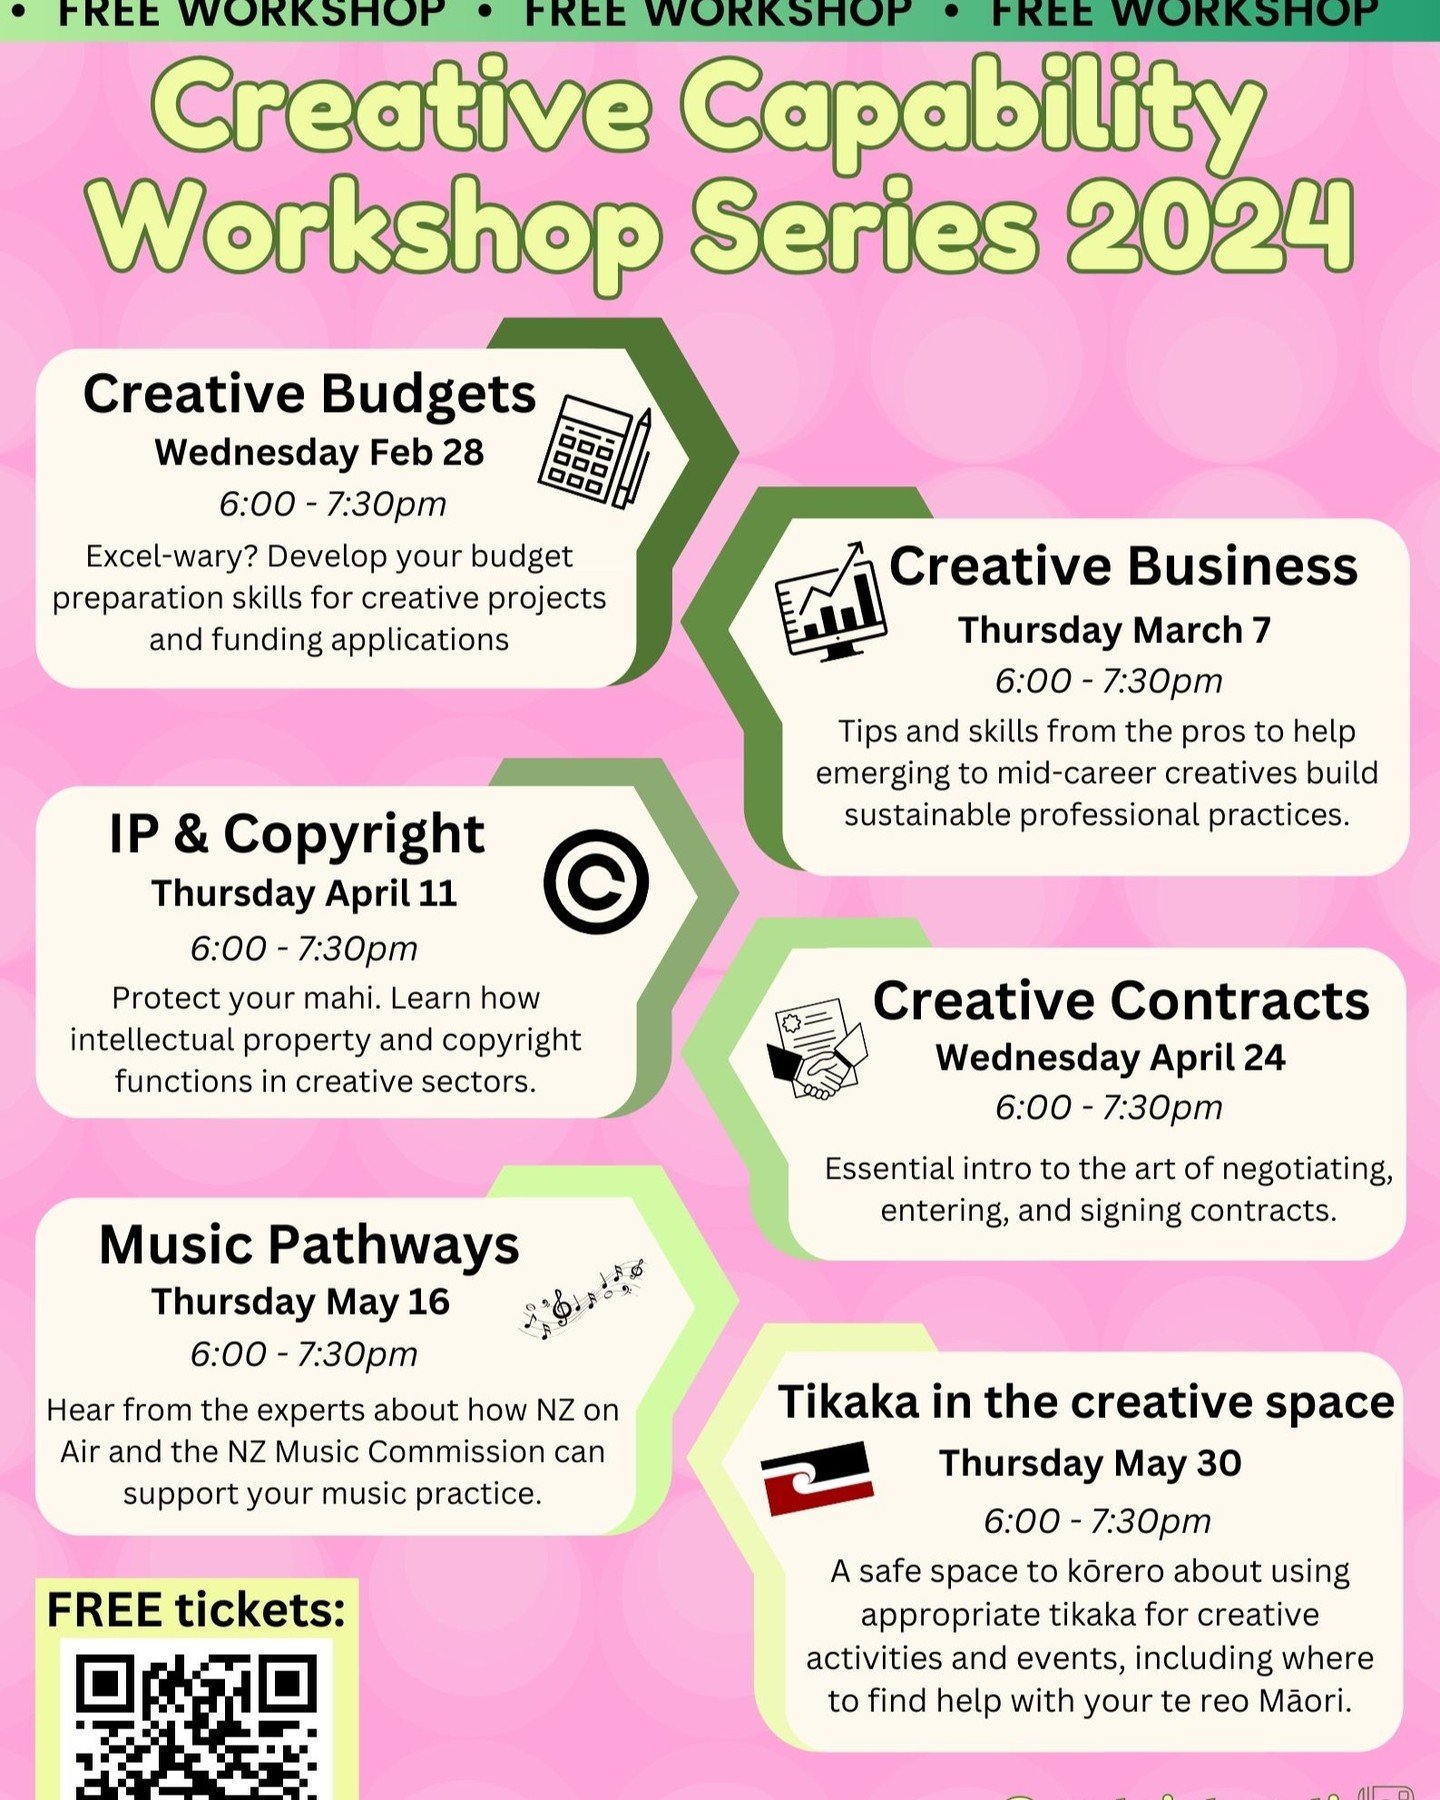 The amazing and FREE creative capability workshops from @aratoiotepoti continue in May with Music Pathways on May 16 and Tikaka in the creative space on May 30. Really looking forward to them - see you there Ōtepoti creatives! 
#communityworkshops #Ō